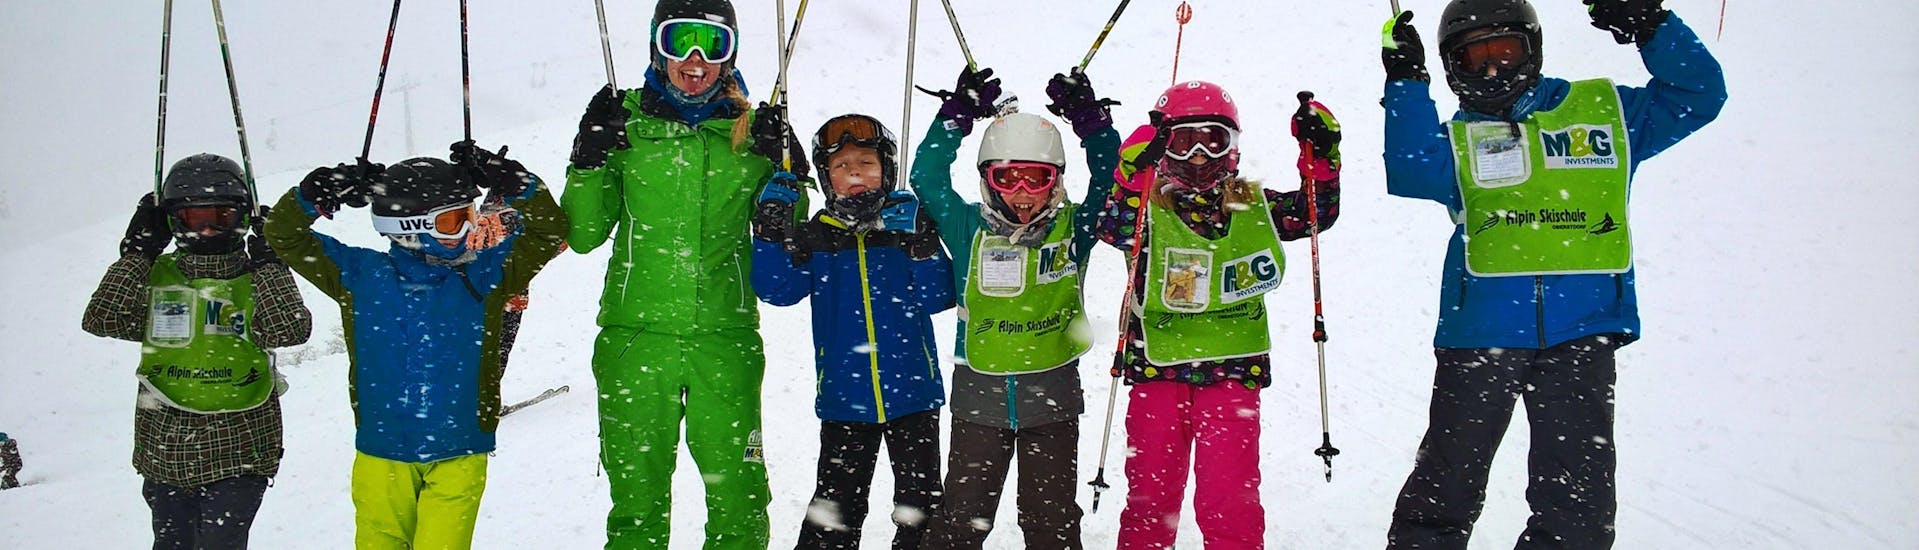 Children are having fun in the Kids Ski Lessons (7-8 years) - Beginners organised by the Alpin Skischule Oberstdorf.